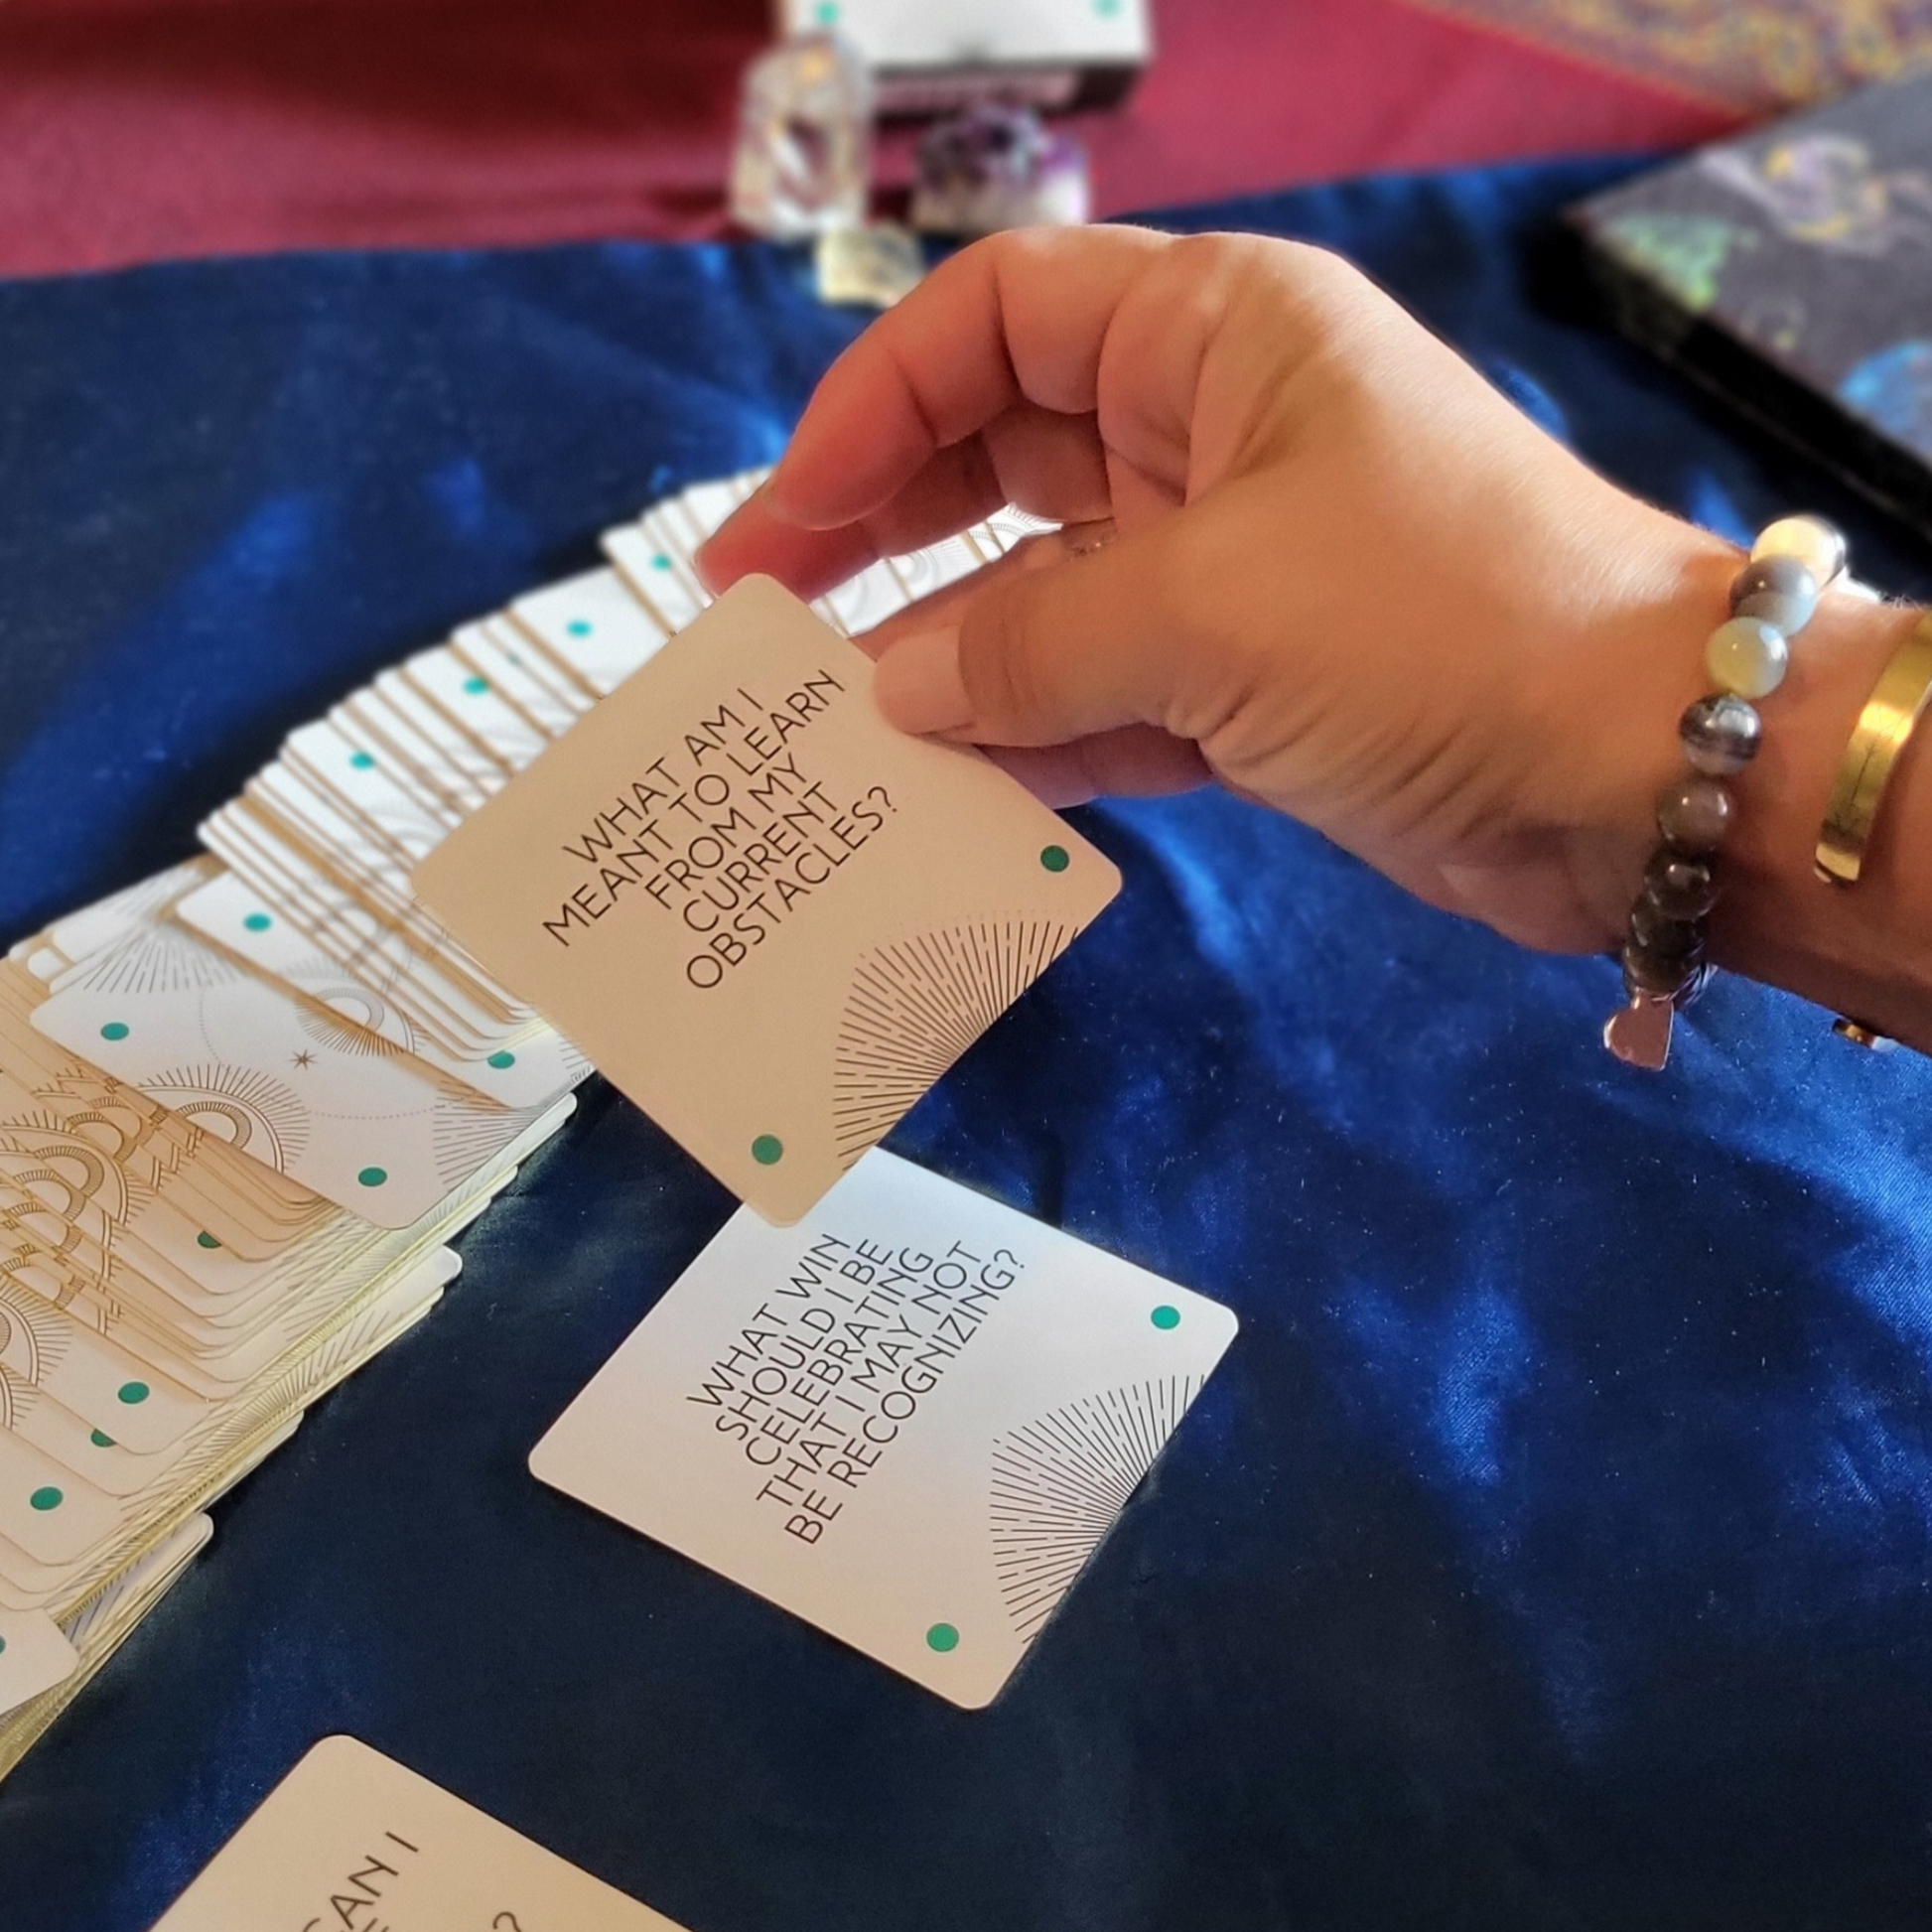 Lady selecting question cards for tarot spread.